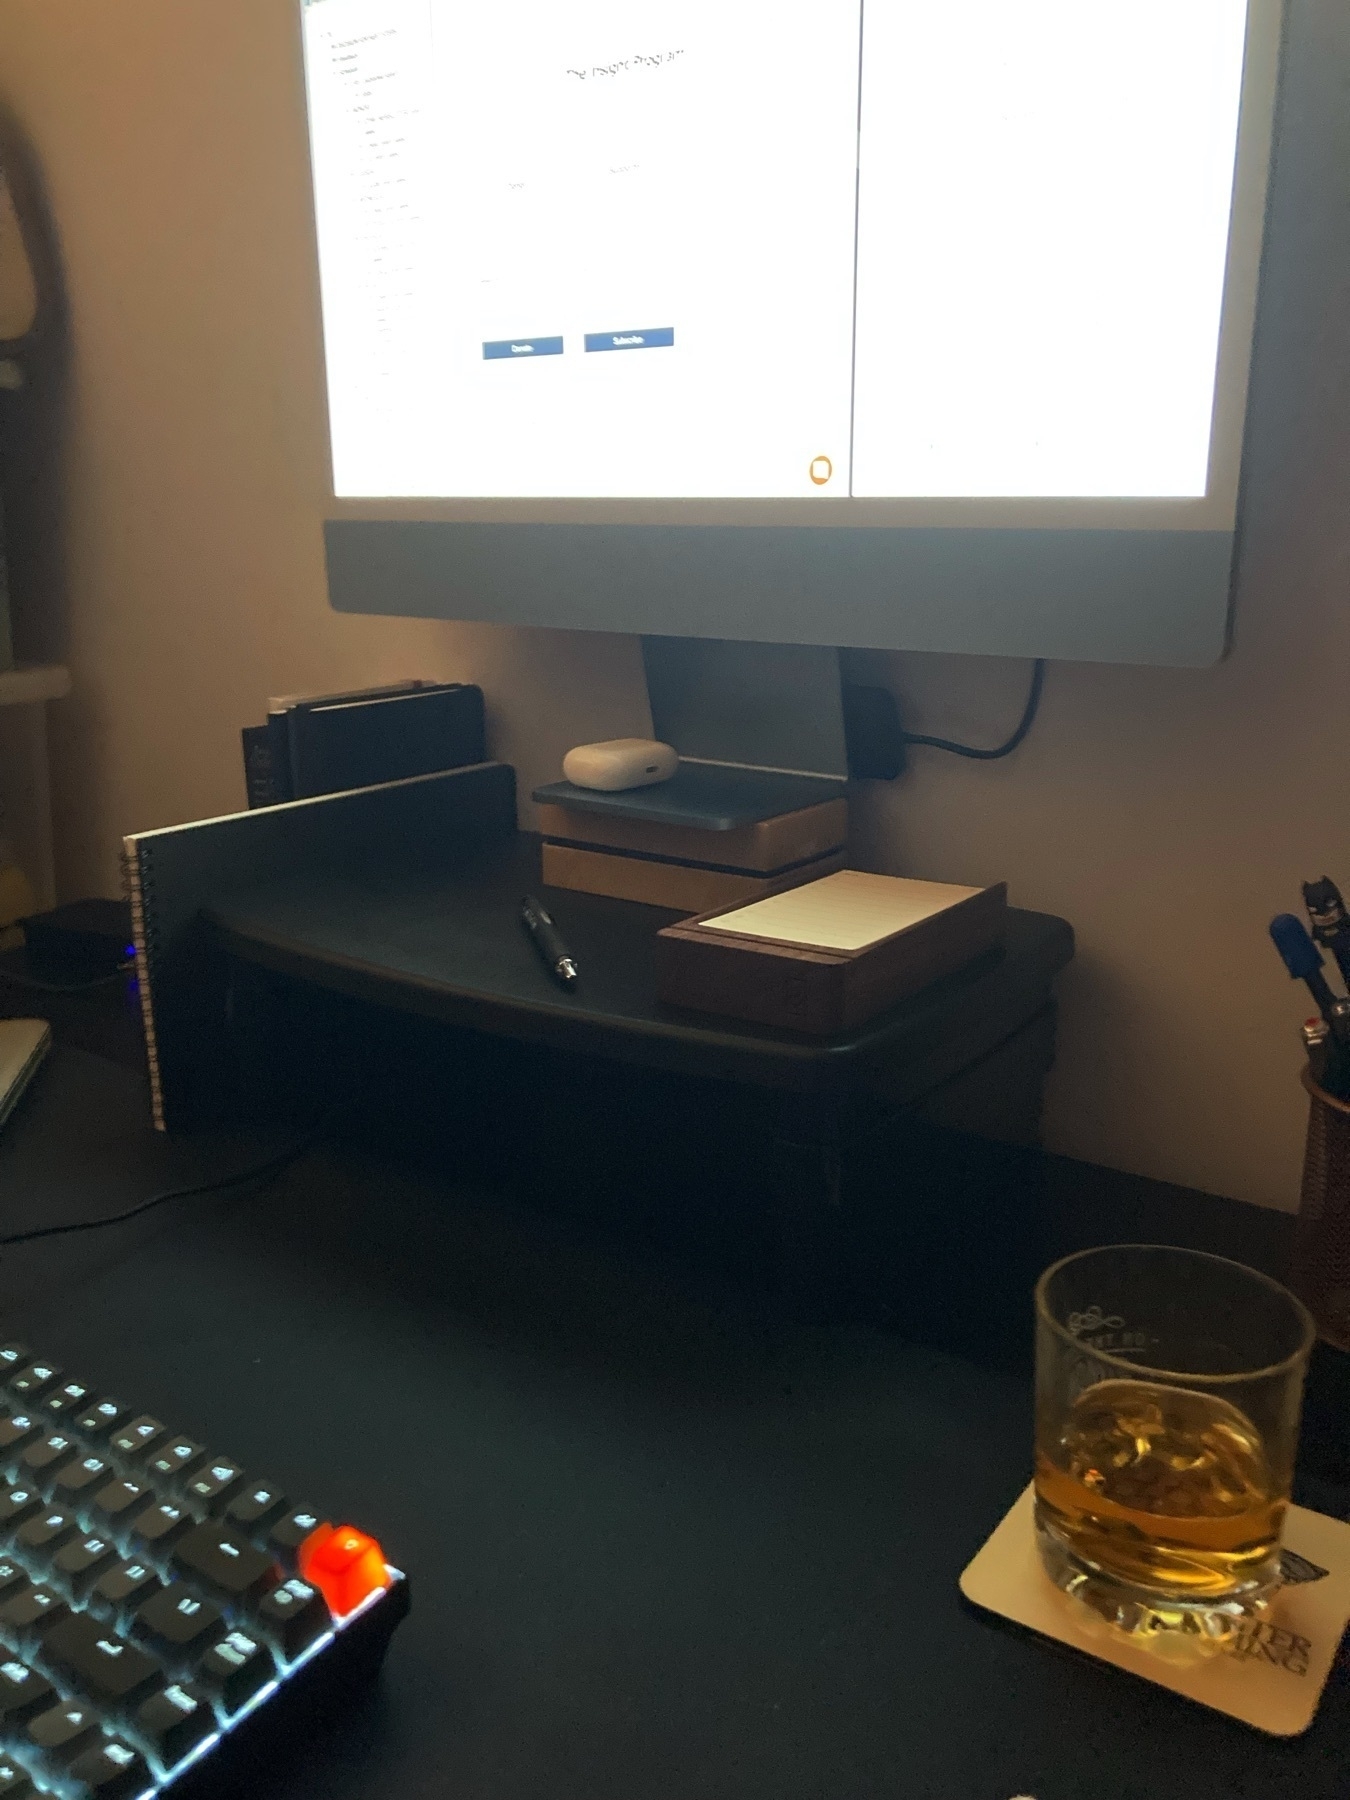 Part of a desk, including a computer, keyboard, pen, AirPods case, glass of whiskey on a coaster, notebooks, and the Analog productivity system.